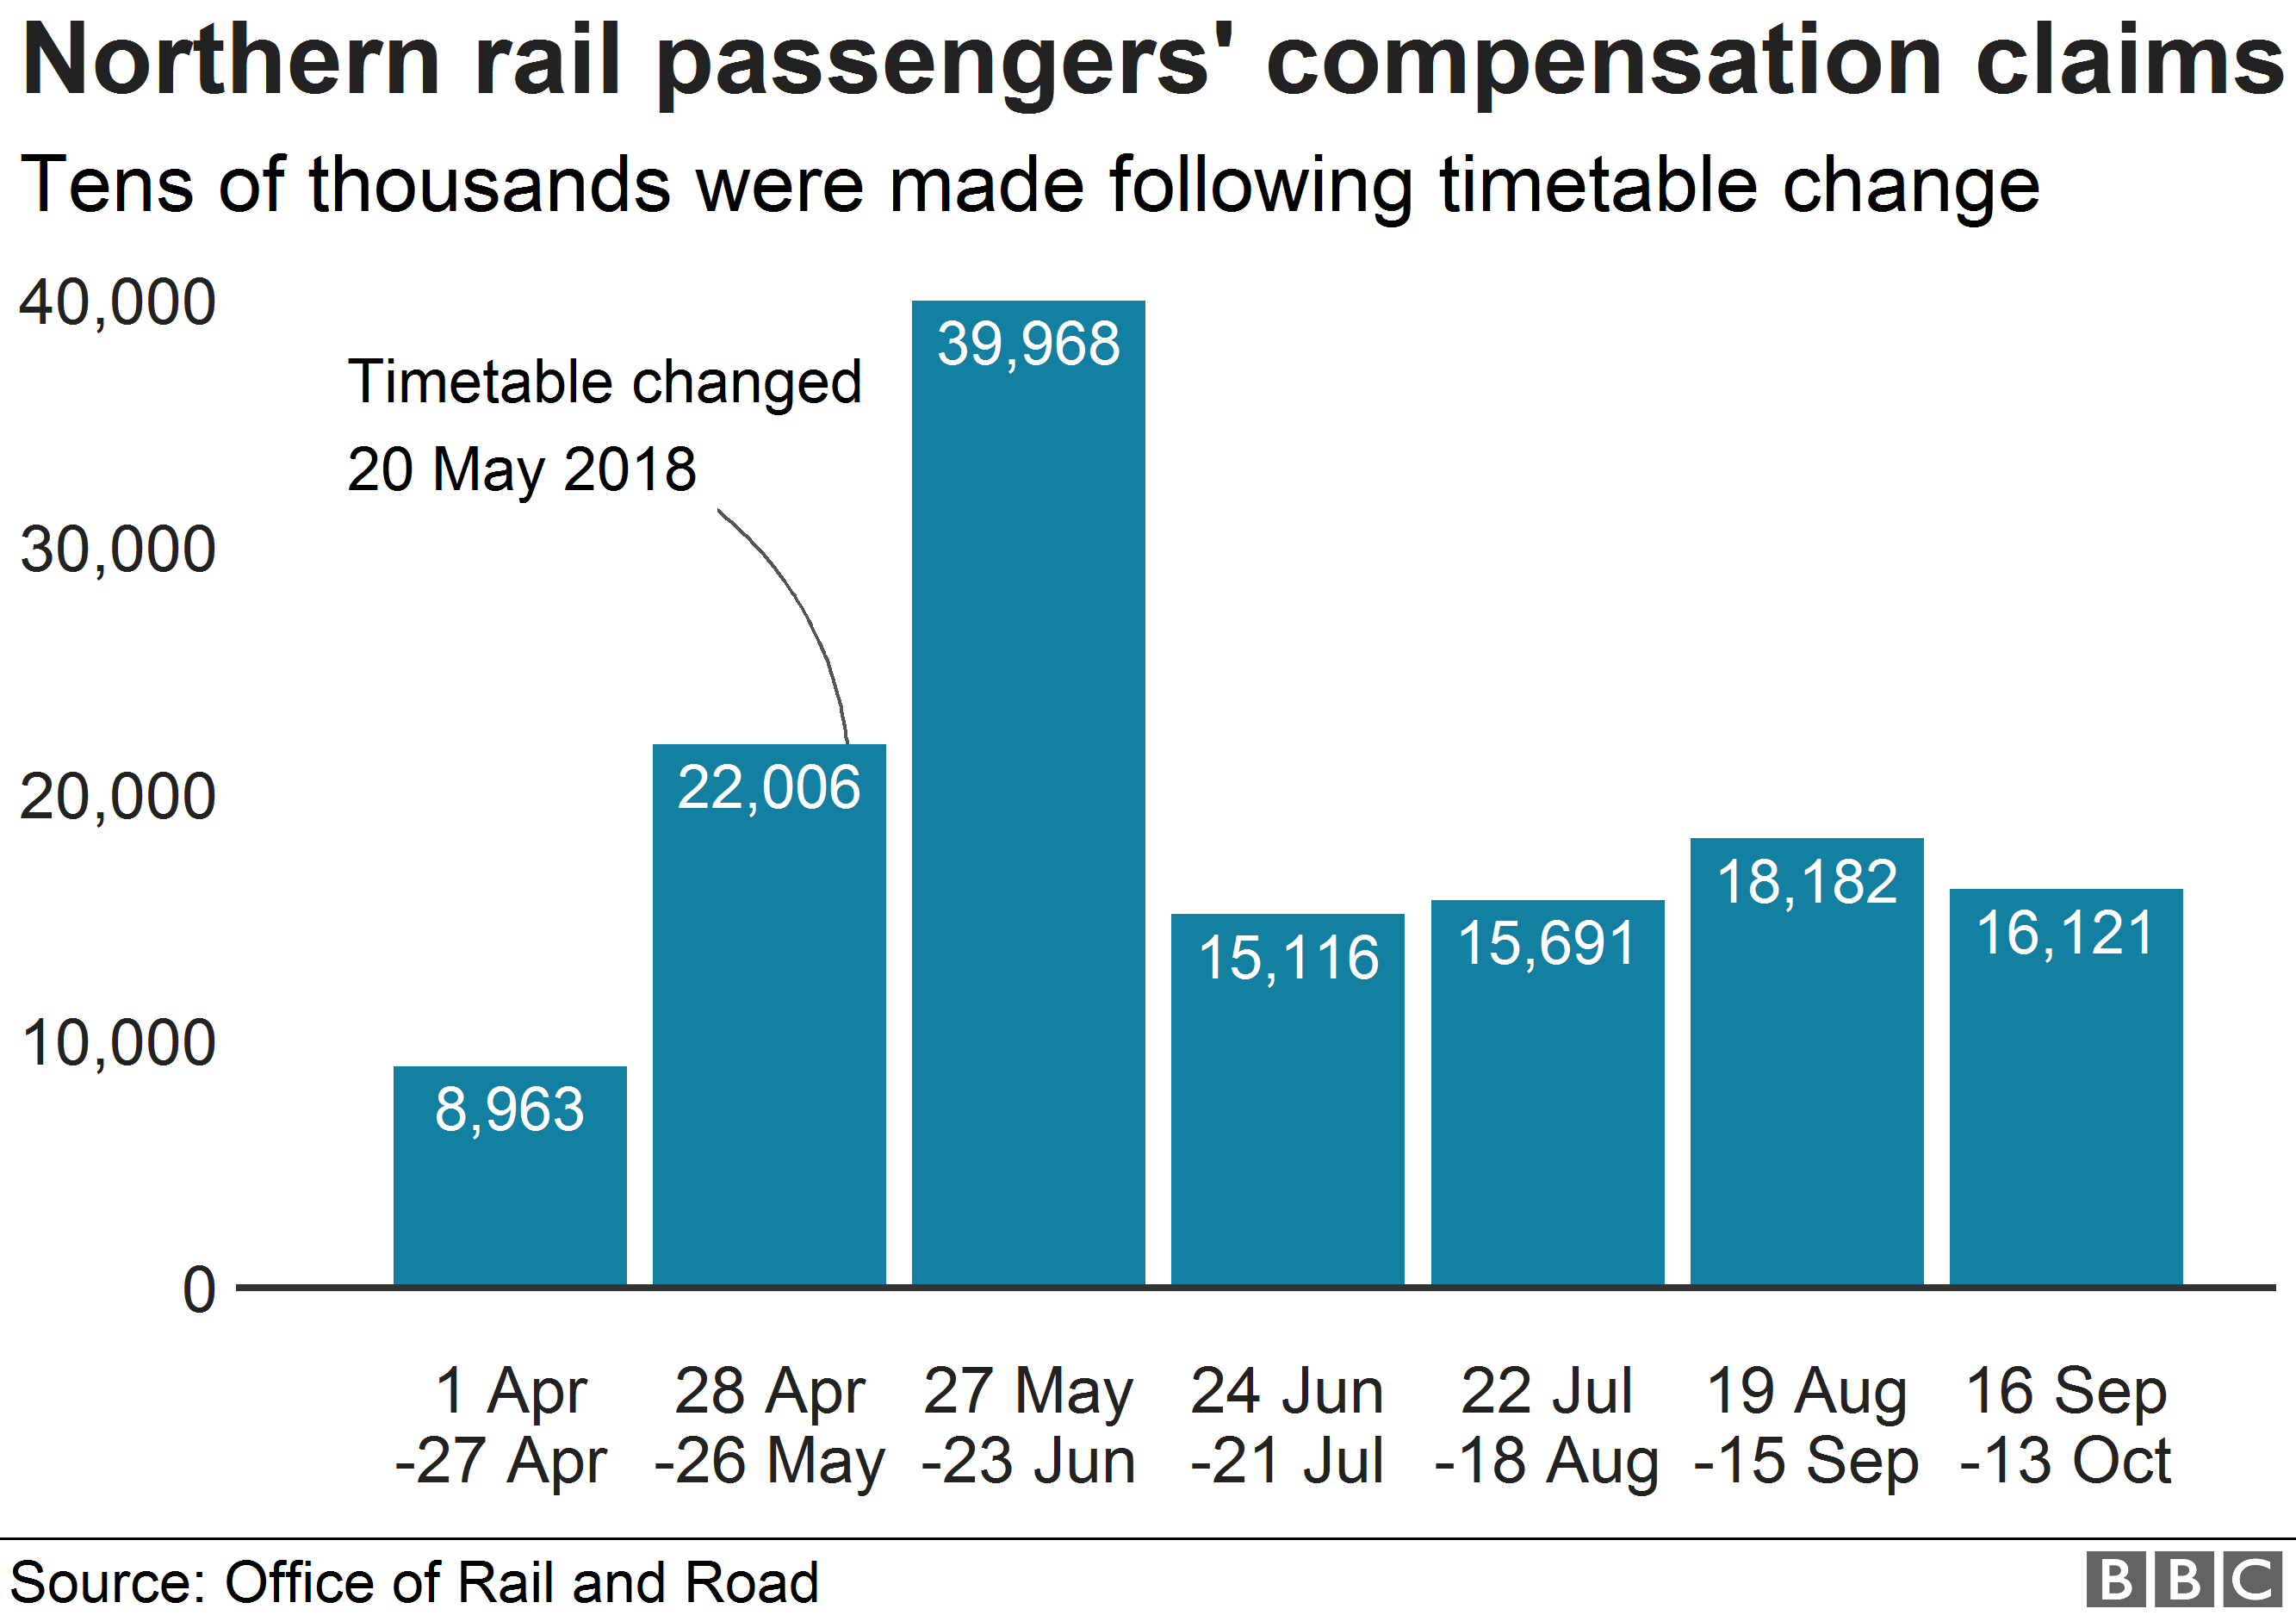 Chart showing compensation claims to Northern Rail